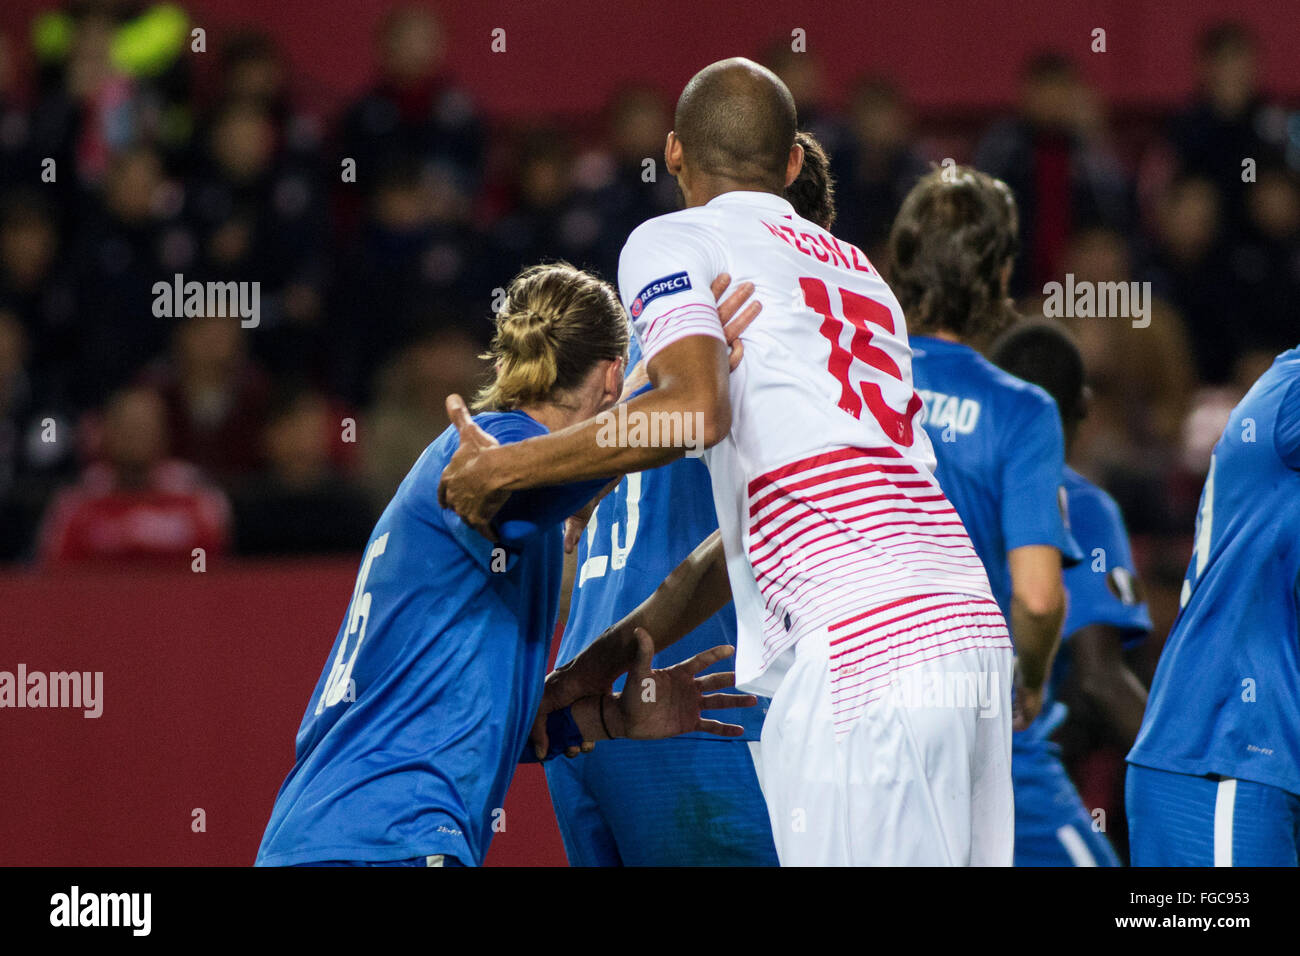 Seville, Spain. 18th February, 2016. Steven N'Zonzi of Sevilla (R ) fights for the ball with Per Egil Flo (L ) during the Europa League match between Sevilla FC and Molde FK at the Ramon Sanchez Pizjuan Stadium  in Seville, Spain, on 18 February, 2016 Credit:  Daniel González Acuña/Alamy Live News Stock Photo